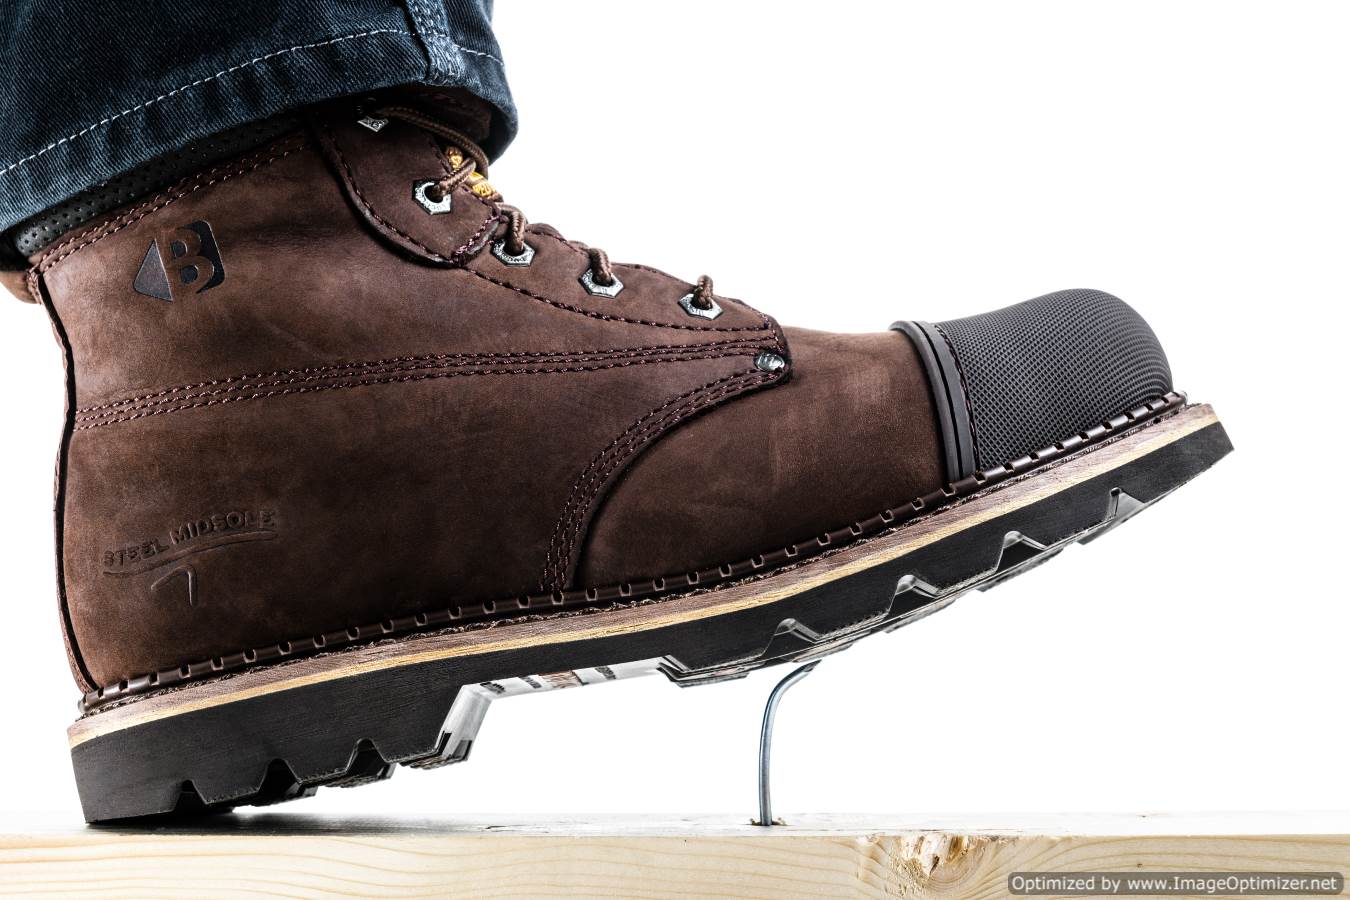 B301 Buckbootz Hard as Nails SB P HRO SRC Chocolate Oil Leather Goodyear Welted Safety Lace Boot